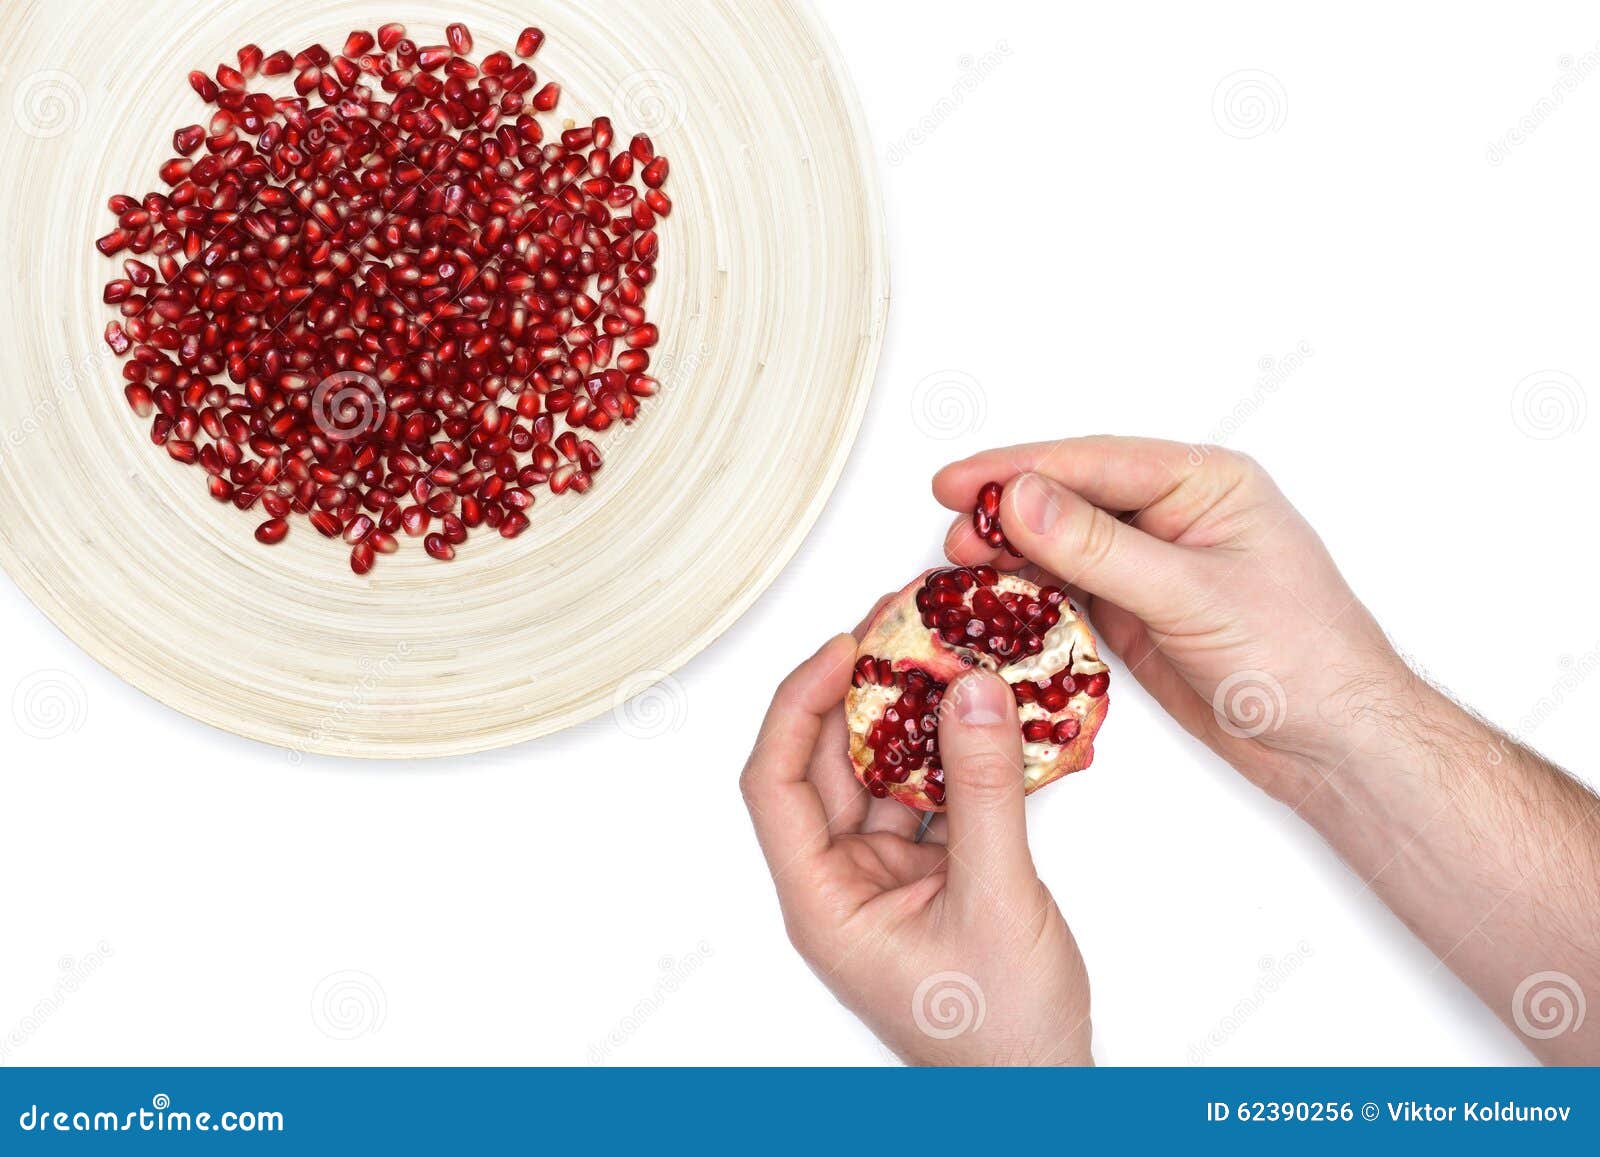 full plate of peeled pomegranate seeds and a man de-seeding gran